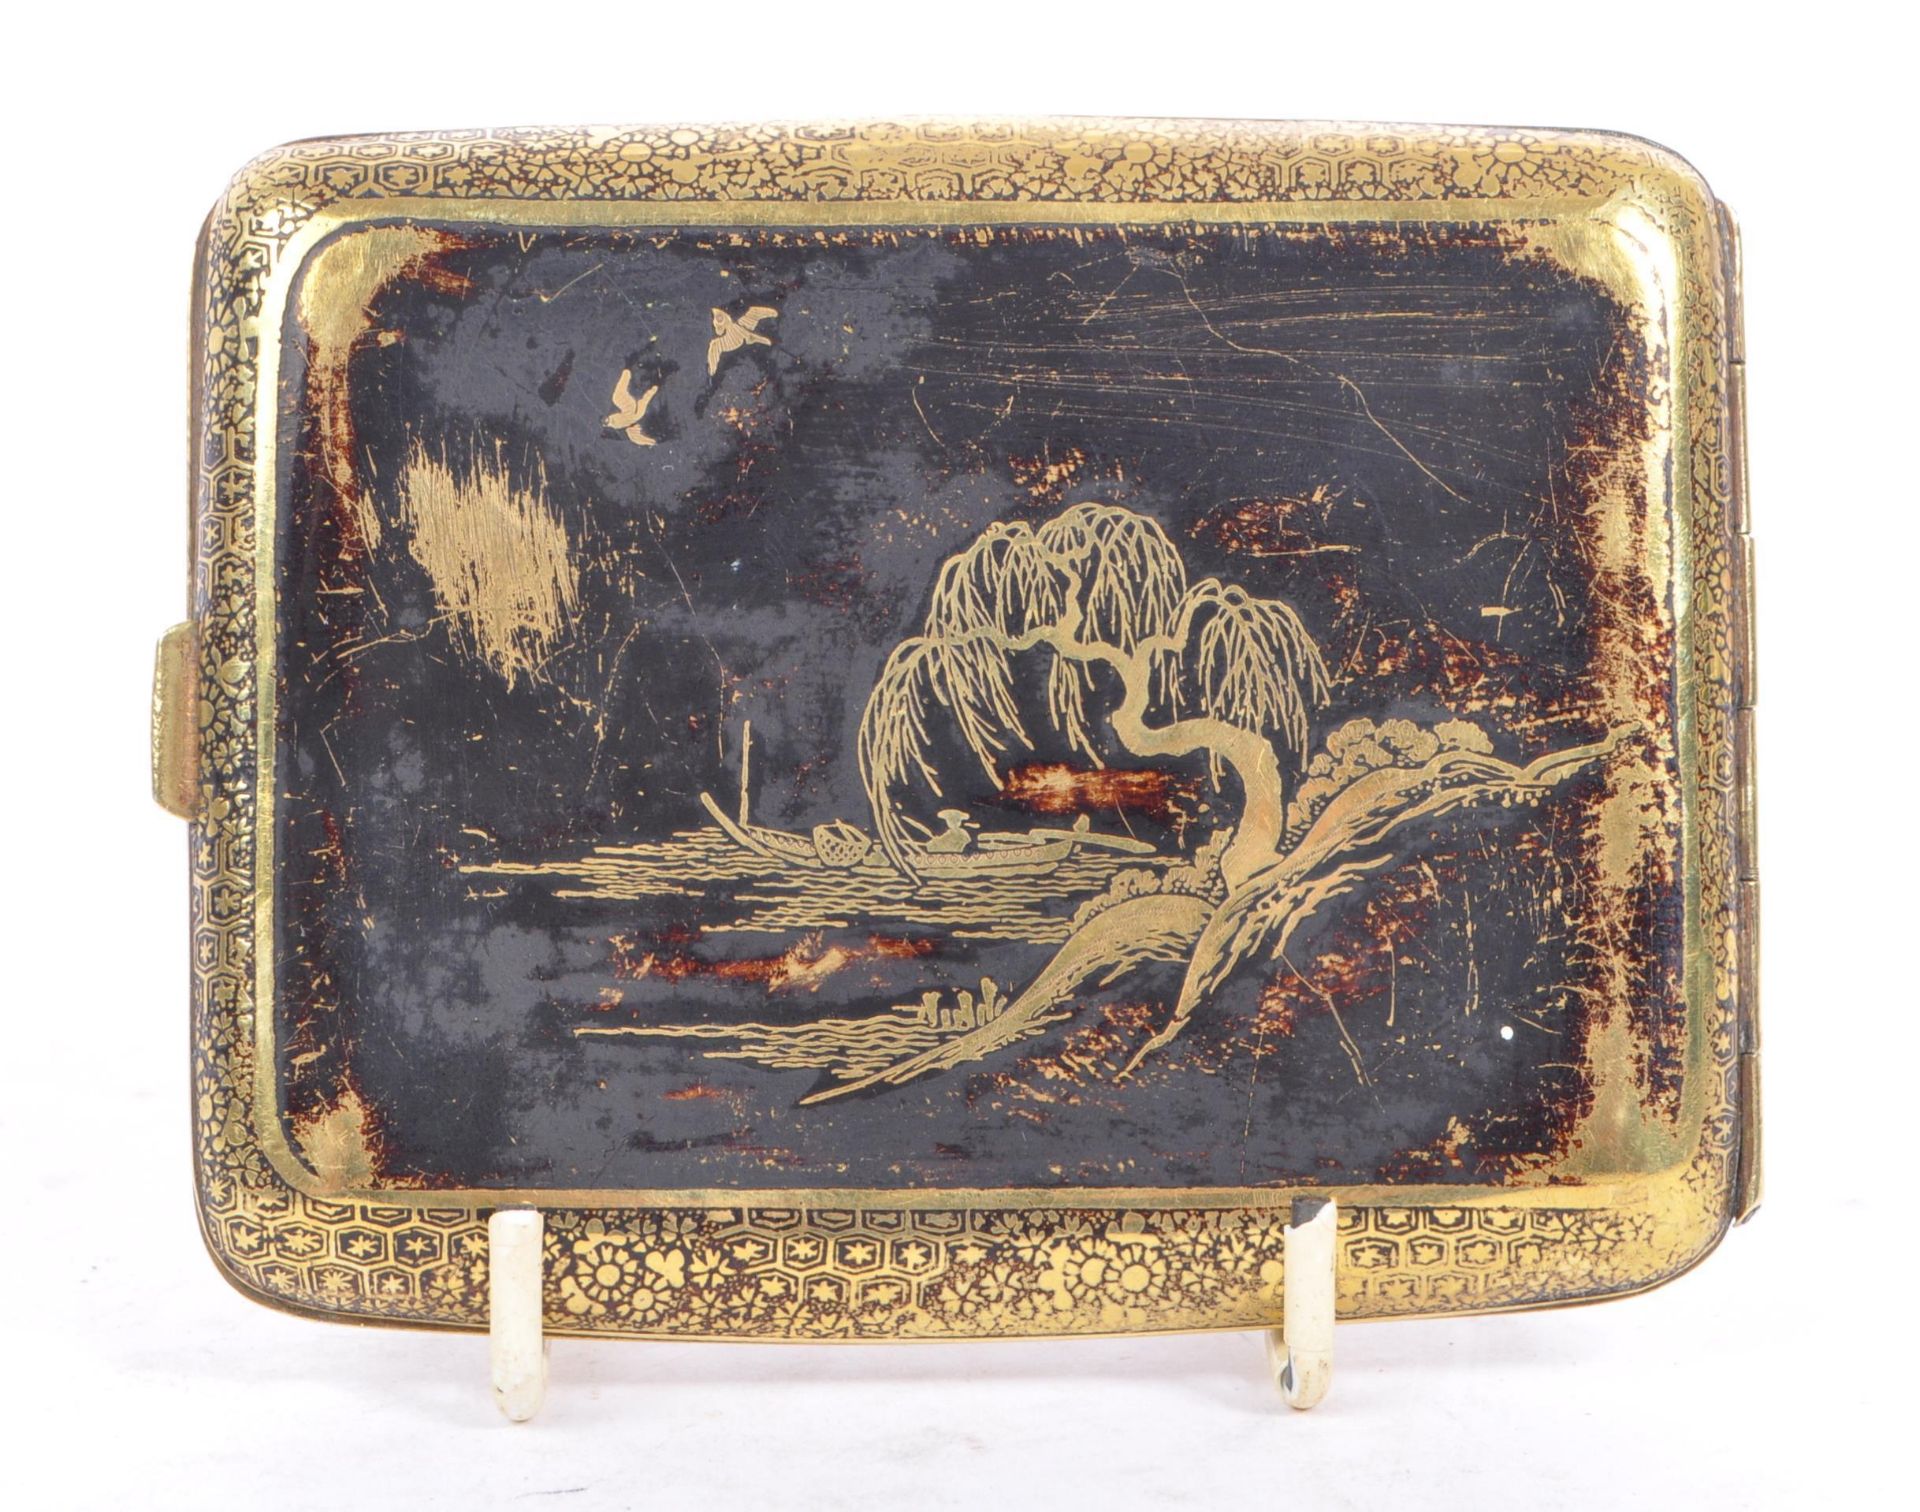 1940S VINTAGE BRASS CHINESE CIGARETTE CASE - Image 4 of 8